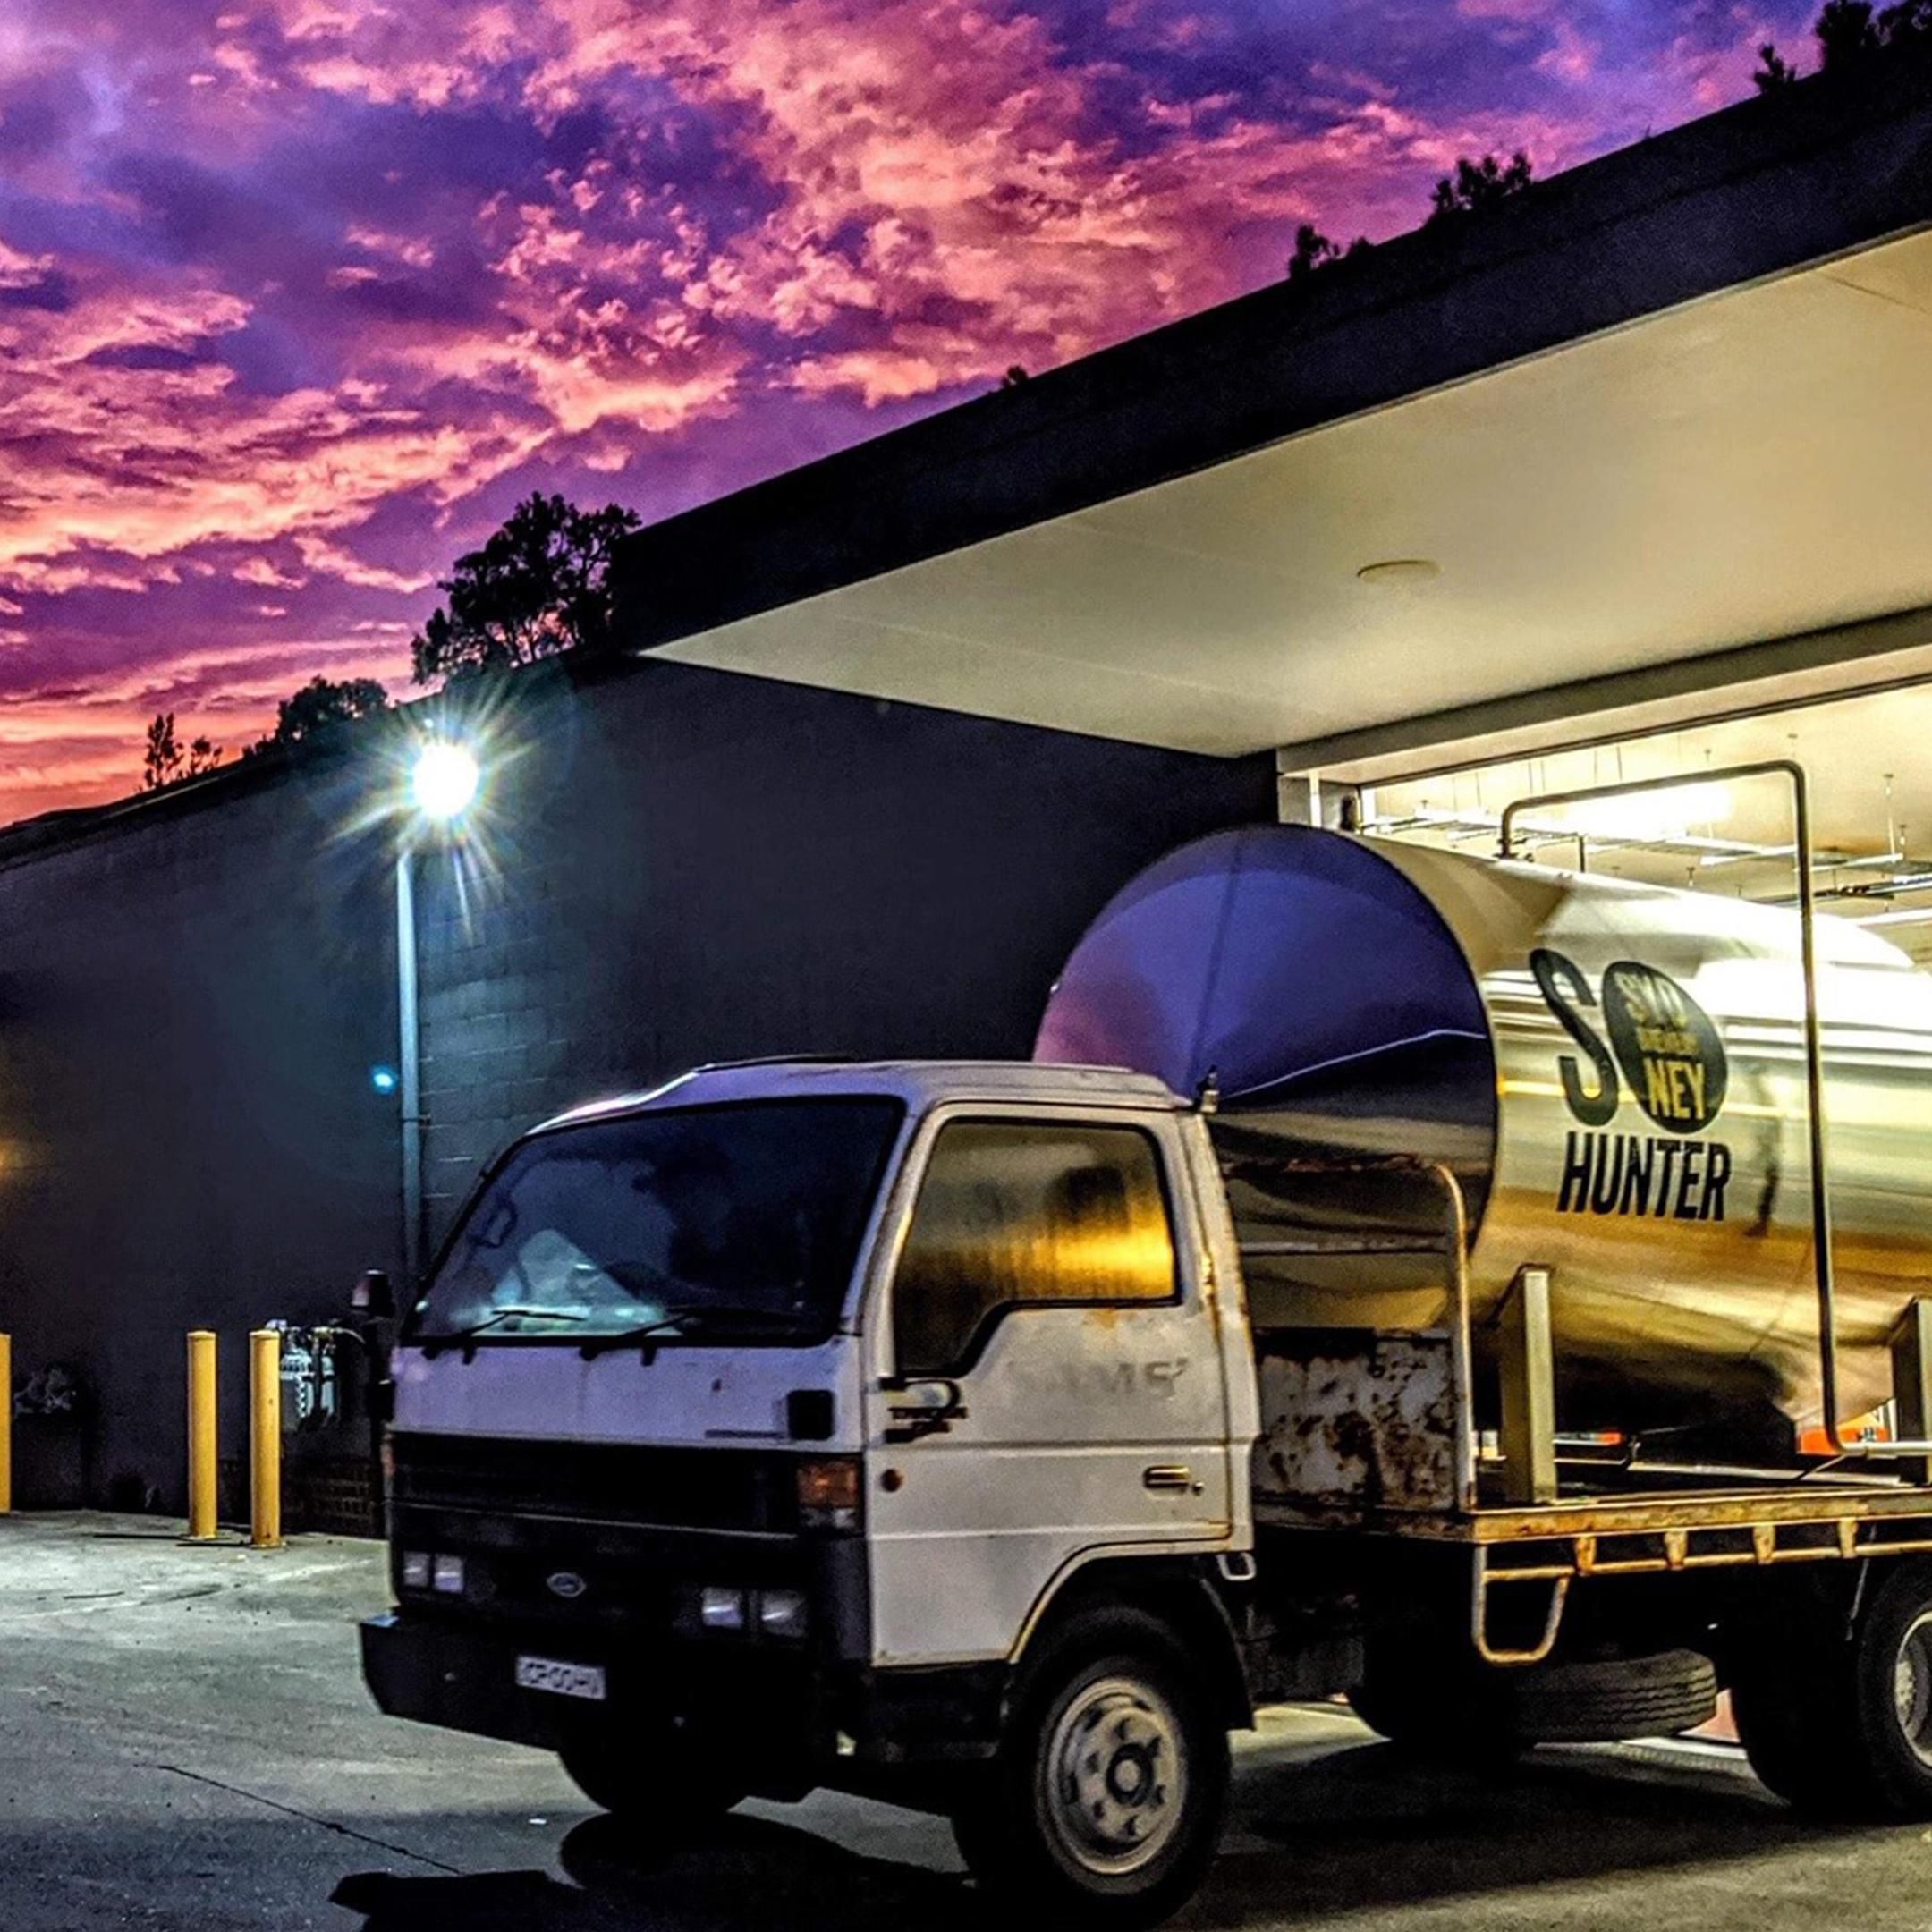 Our on-site brewery at Crowne Plaza Hunter Valley